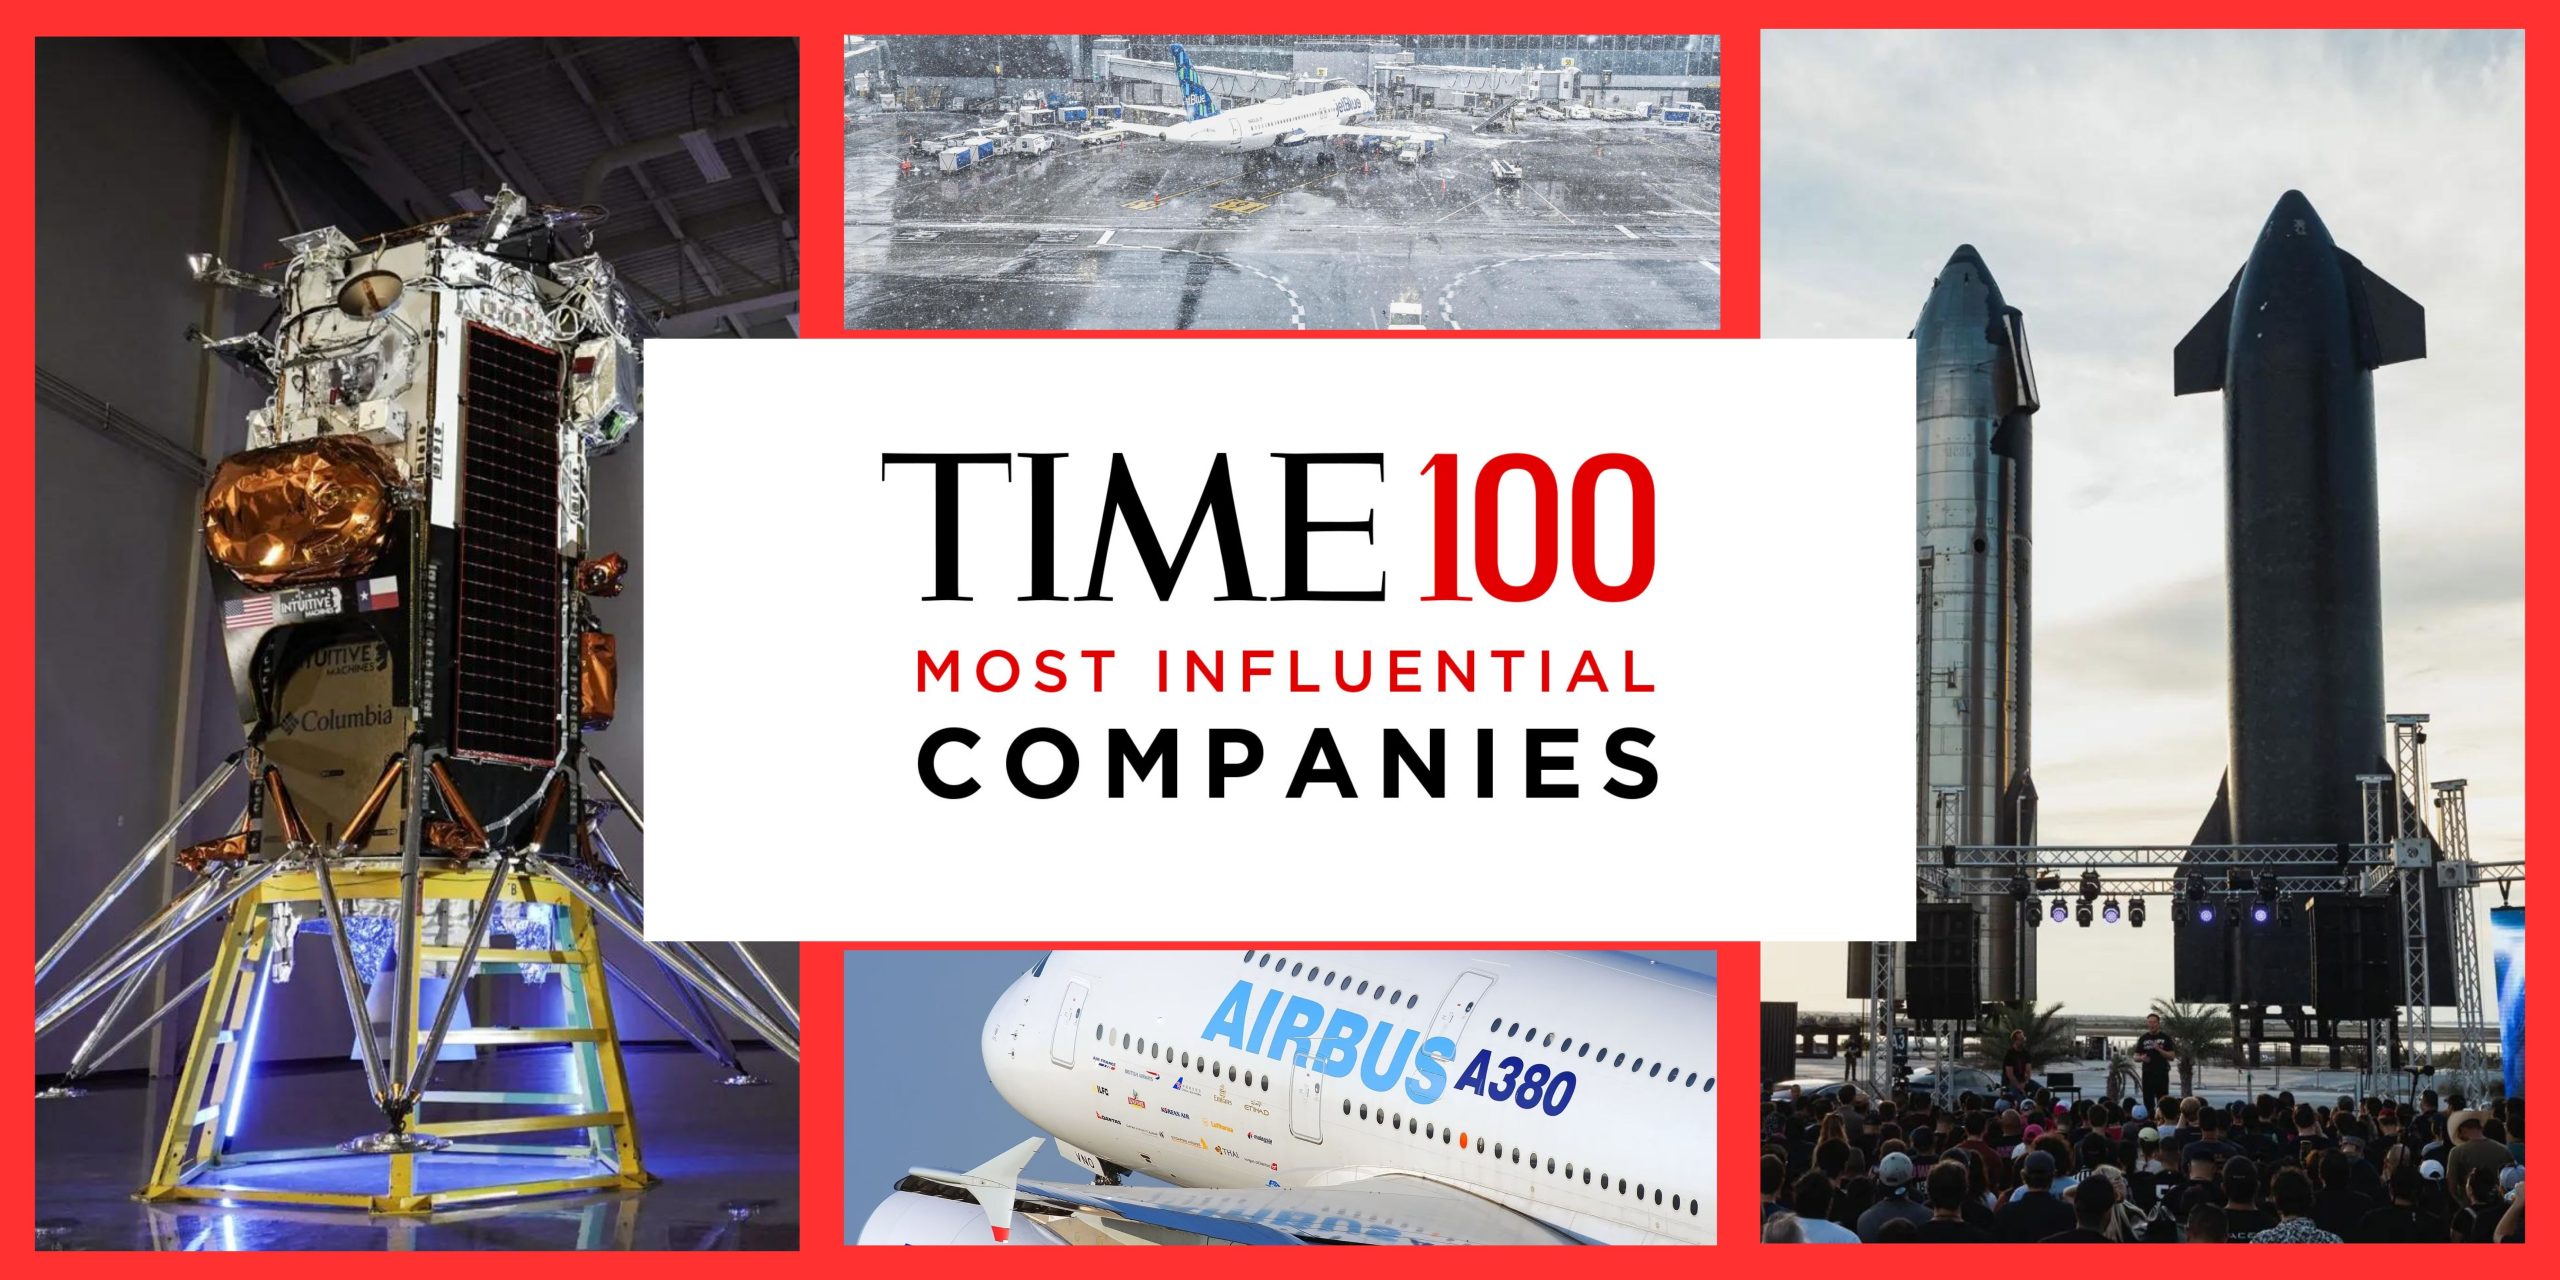 Airbus, Intuitive Machines and Weather Company Tomorrow.io Get in TIME’s List of 100 Most Influential Companies